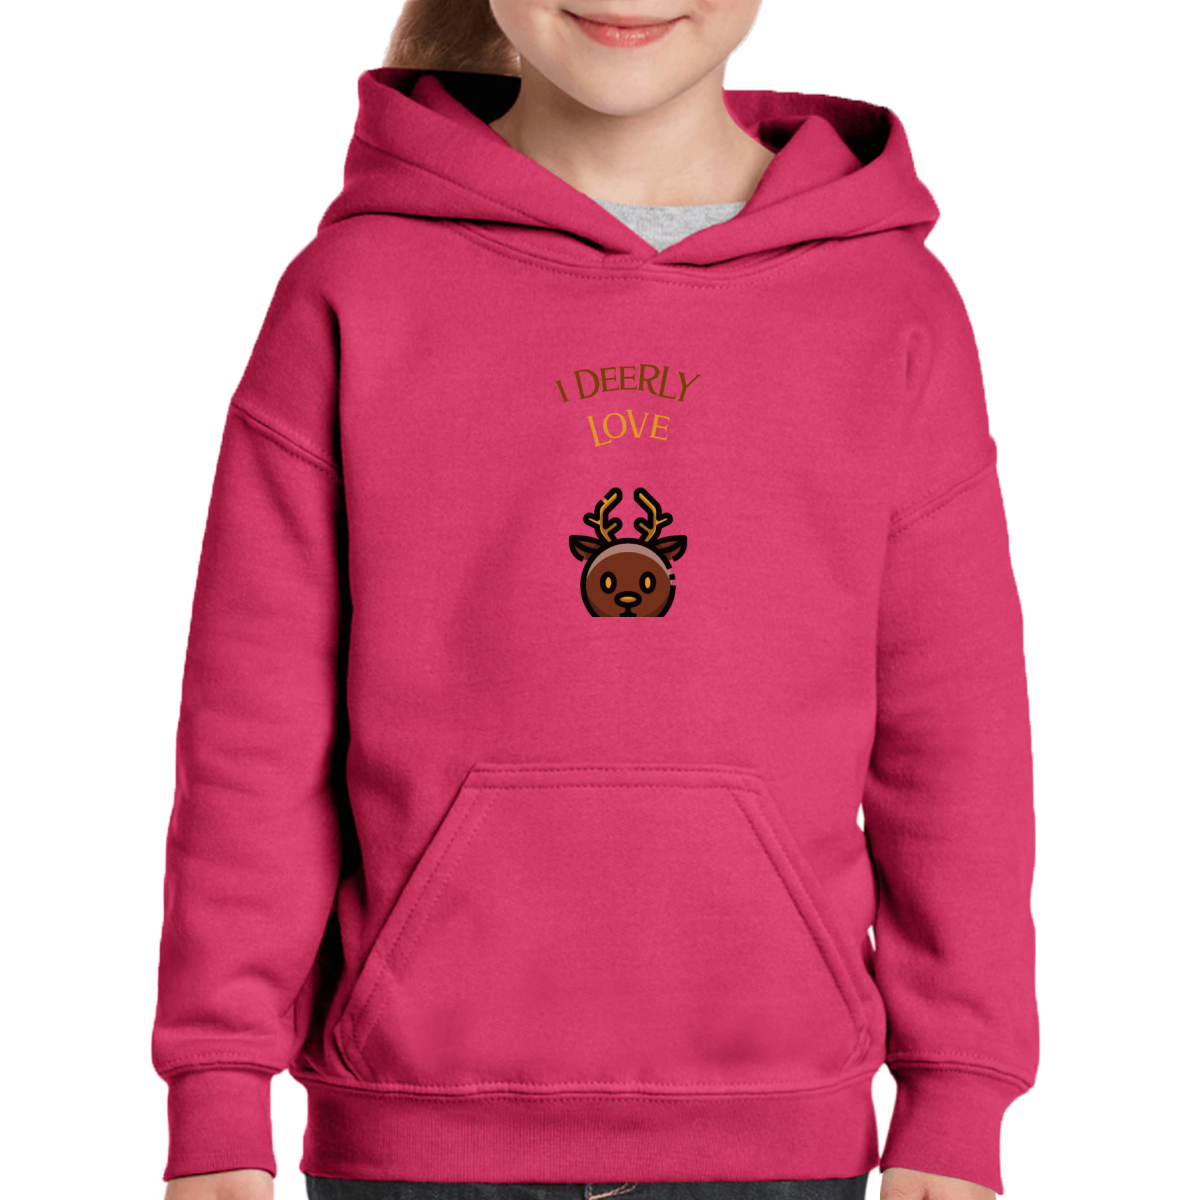 I Deerly Love This Time of the Year! Kids Hoodie | Pink